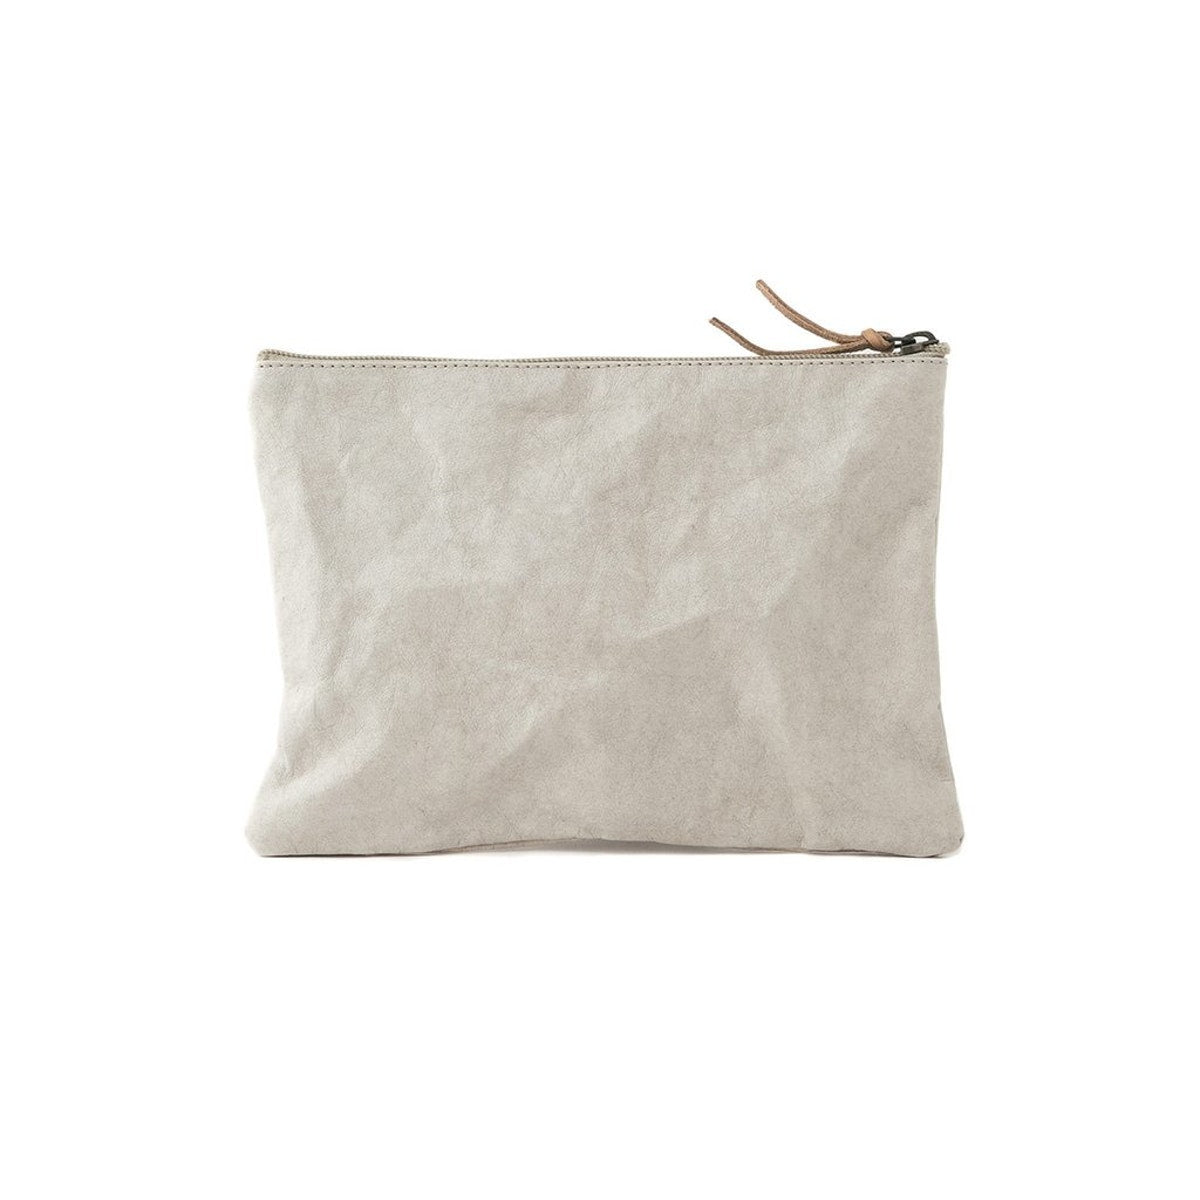 A cream washable paper top zip pouch is shown from the front. It features a brown zip toggle.